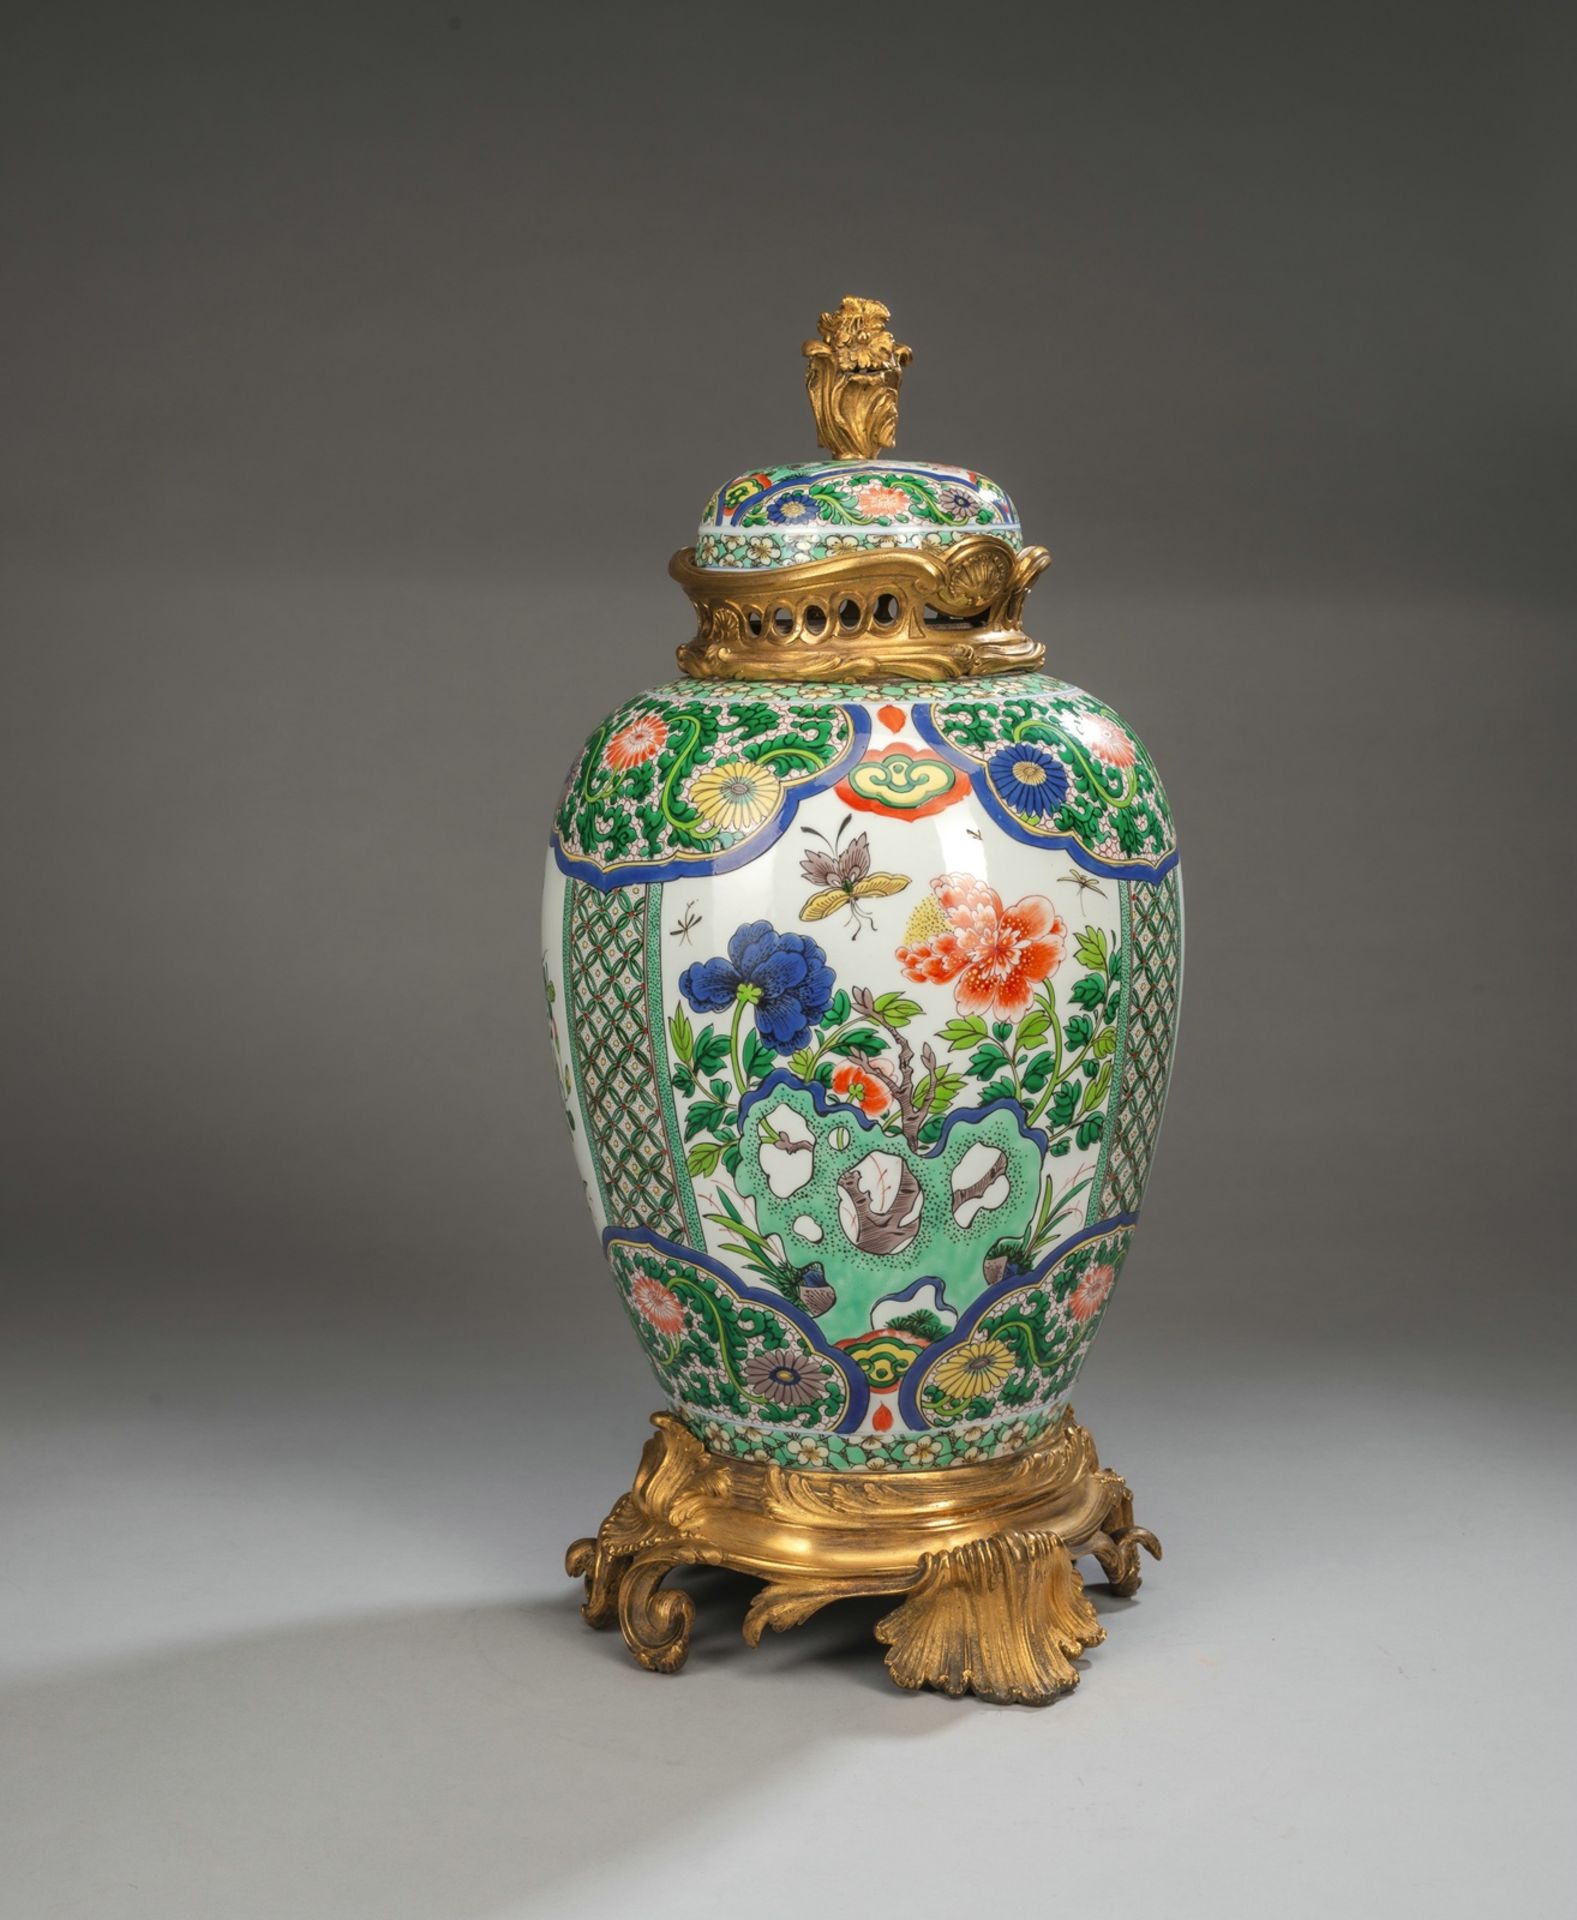 A LARGE CHINOISERIE STYLE ORMOLU MOUNTED PORCELAIN VASE AND COVER - Image 3 of 4